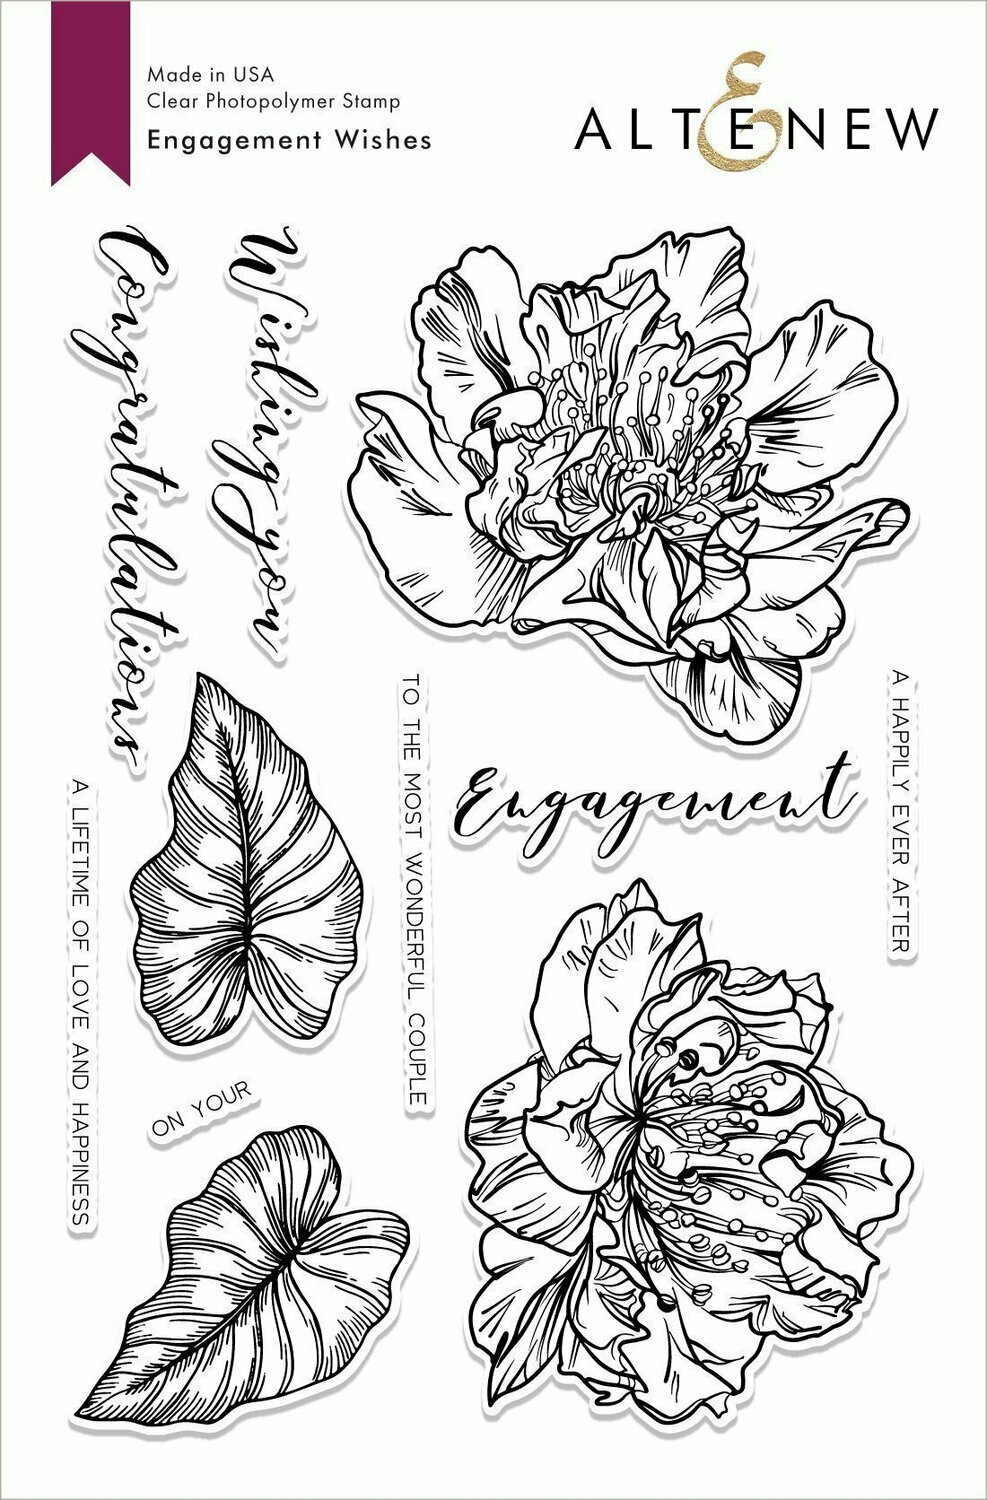 Altenew ENGAGEMENT WISHES Clear Stamp Set